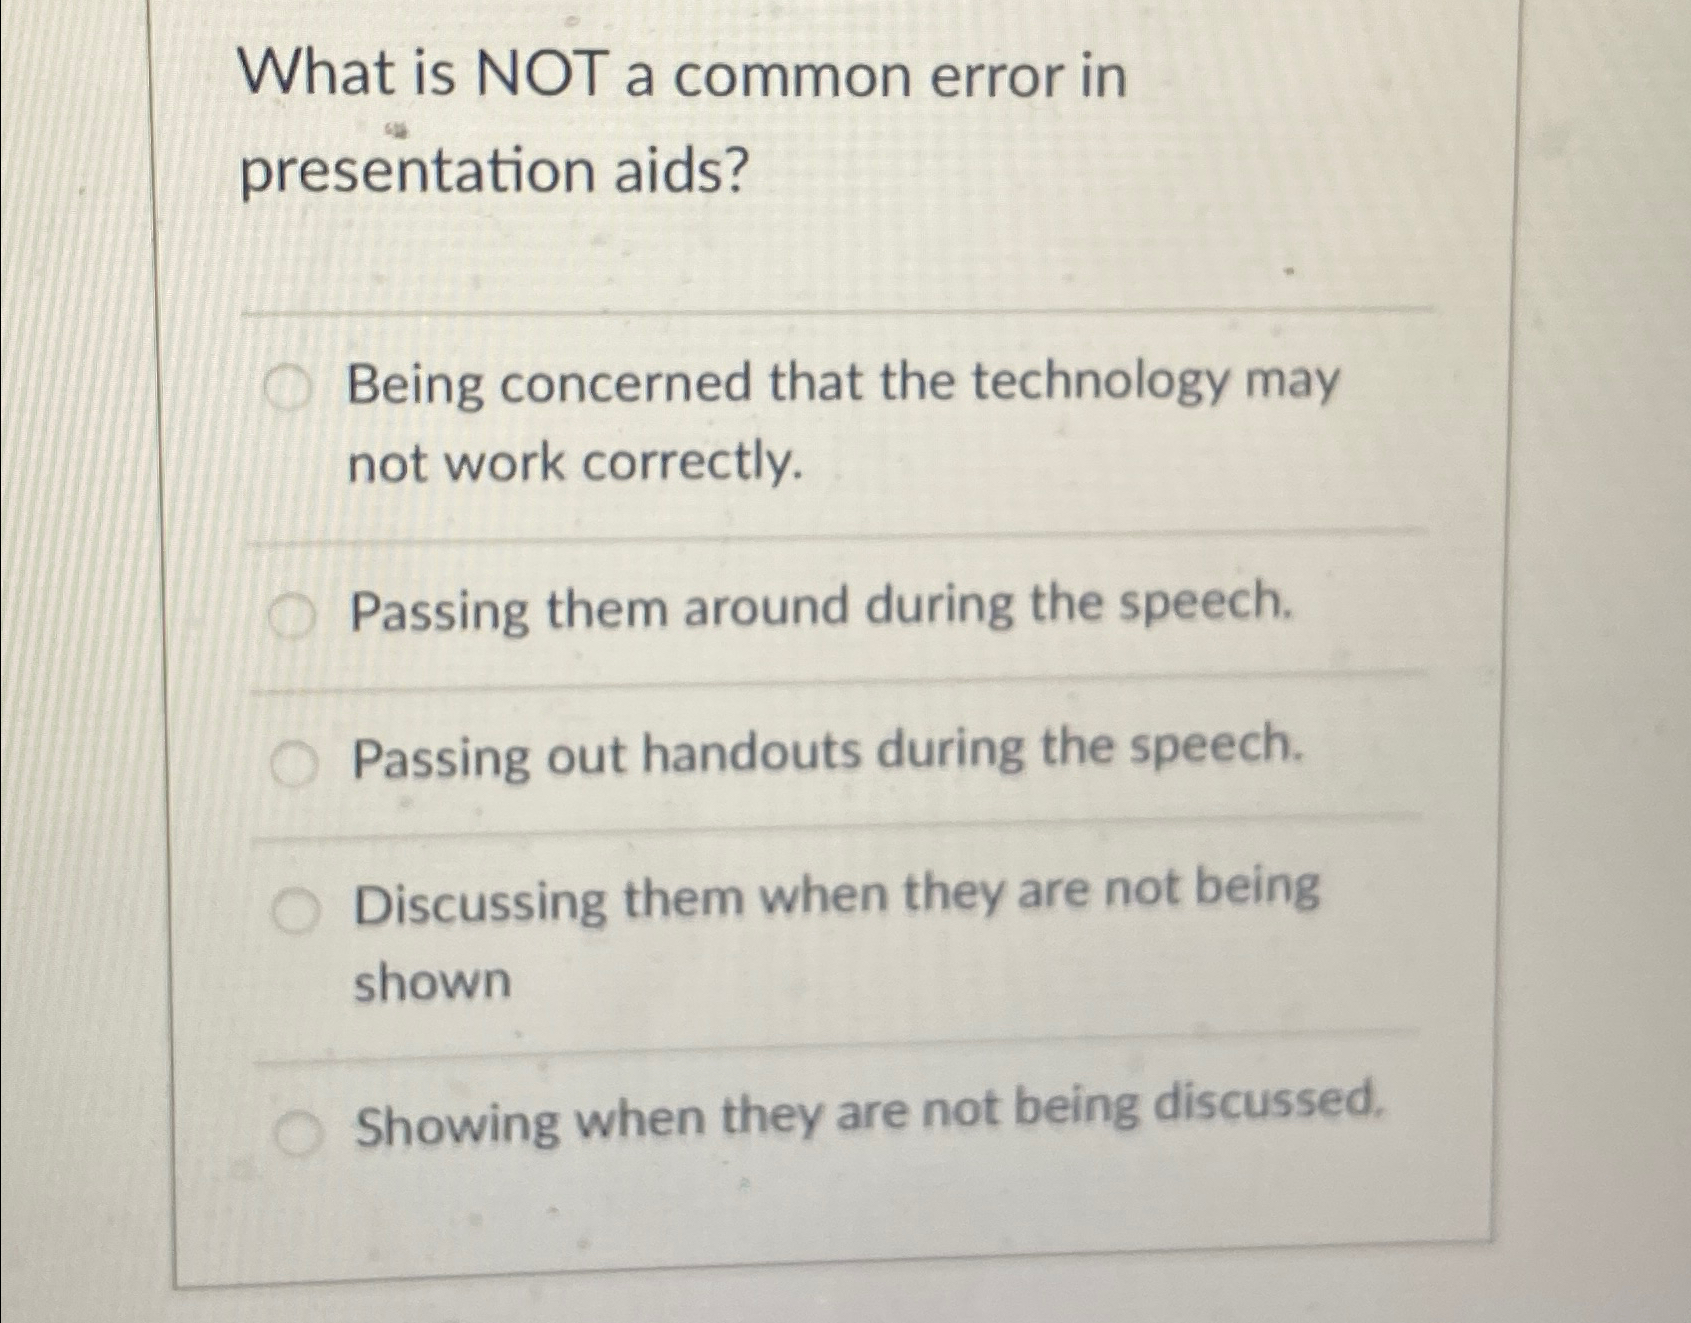 what is not a common error in presentation aids quizlet